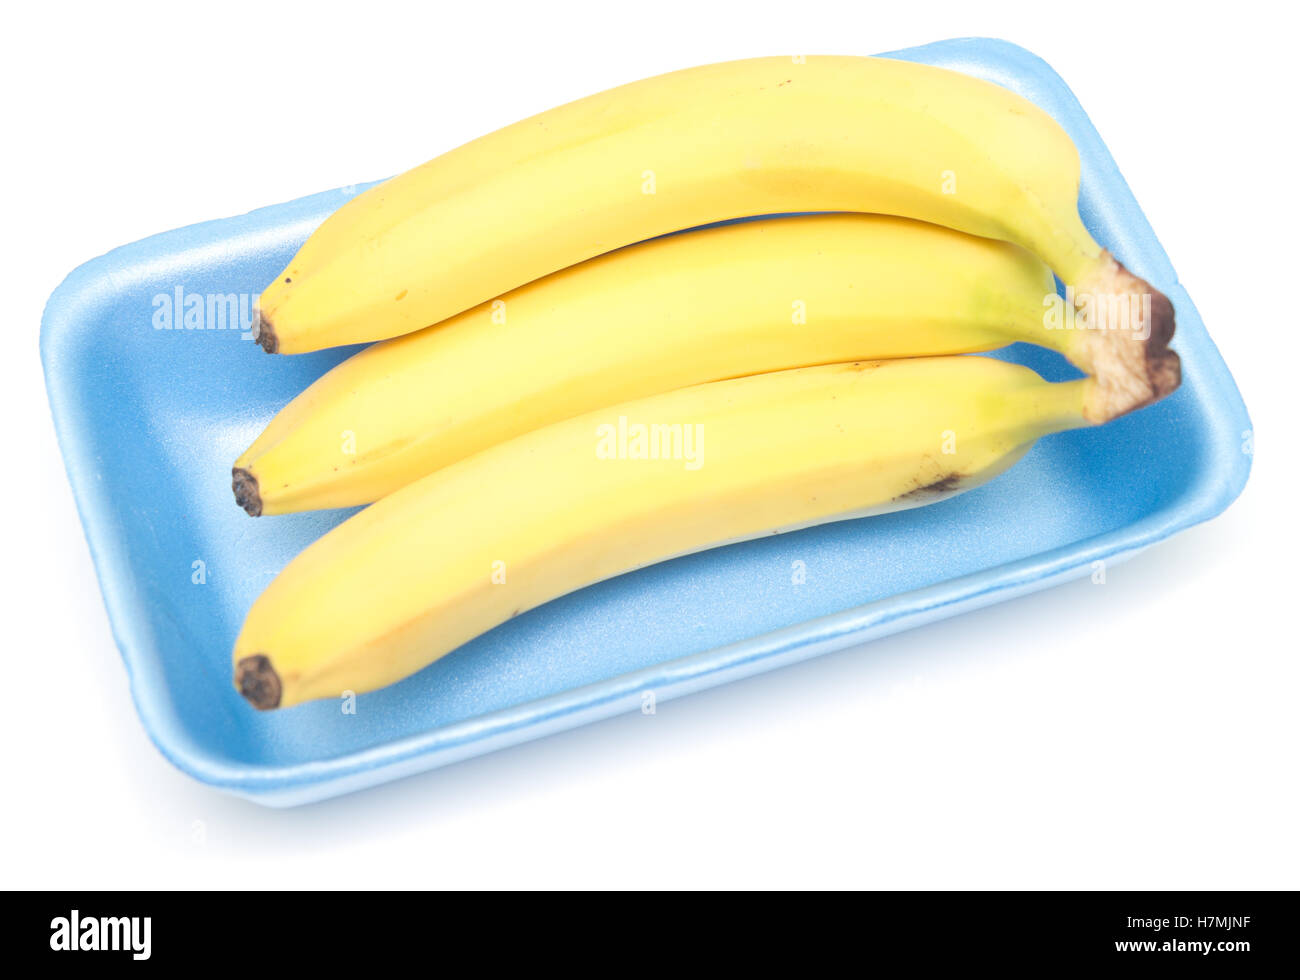 https://c8.alamy.com/comp/H7MJNF/bananas-in-plastic-tray-isolated-on-white-background-H7MJNF.jpg